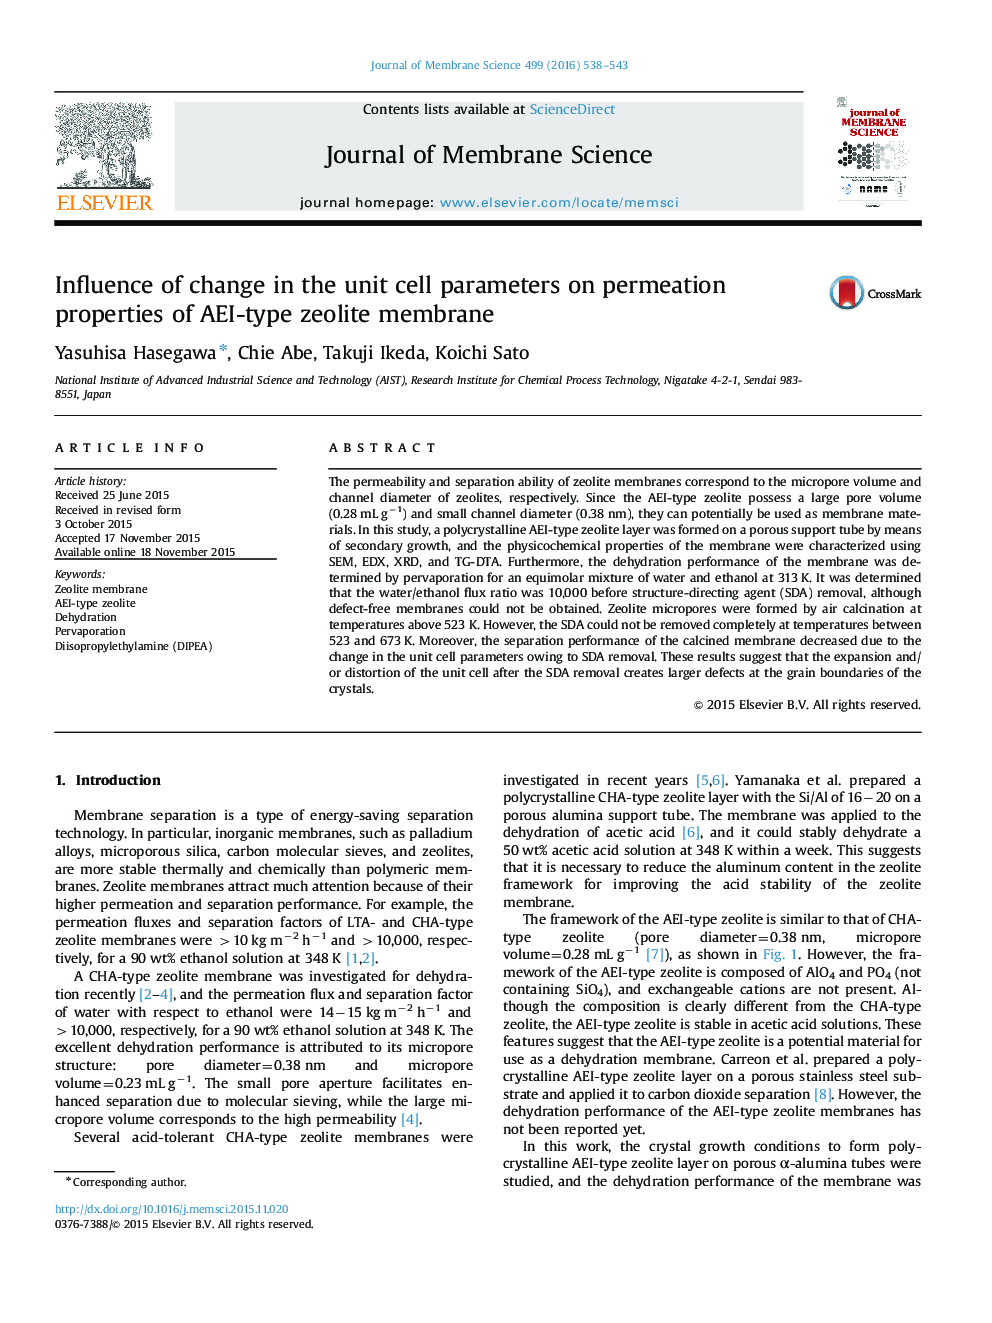 Influence of change in the unit cell parameters on permeation properties of AEI-type zeolite membrane